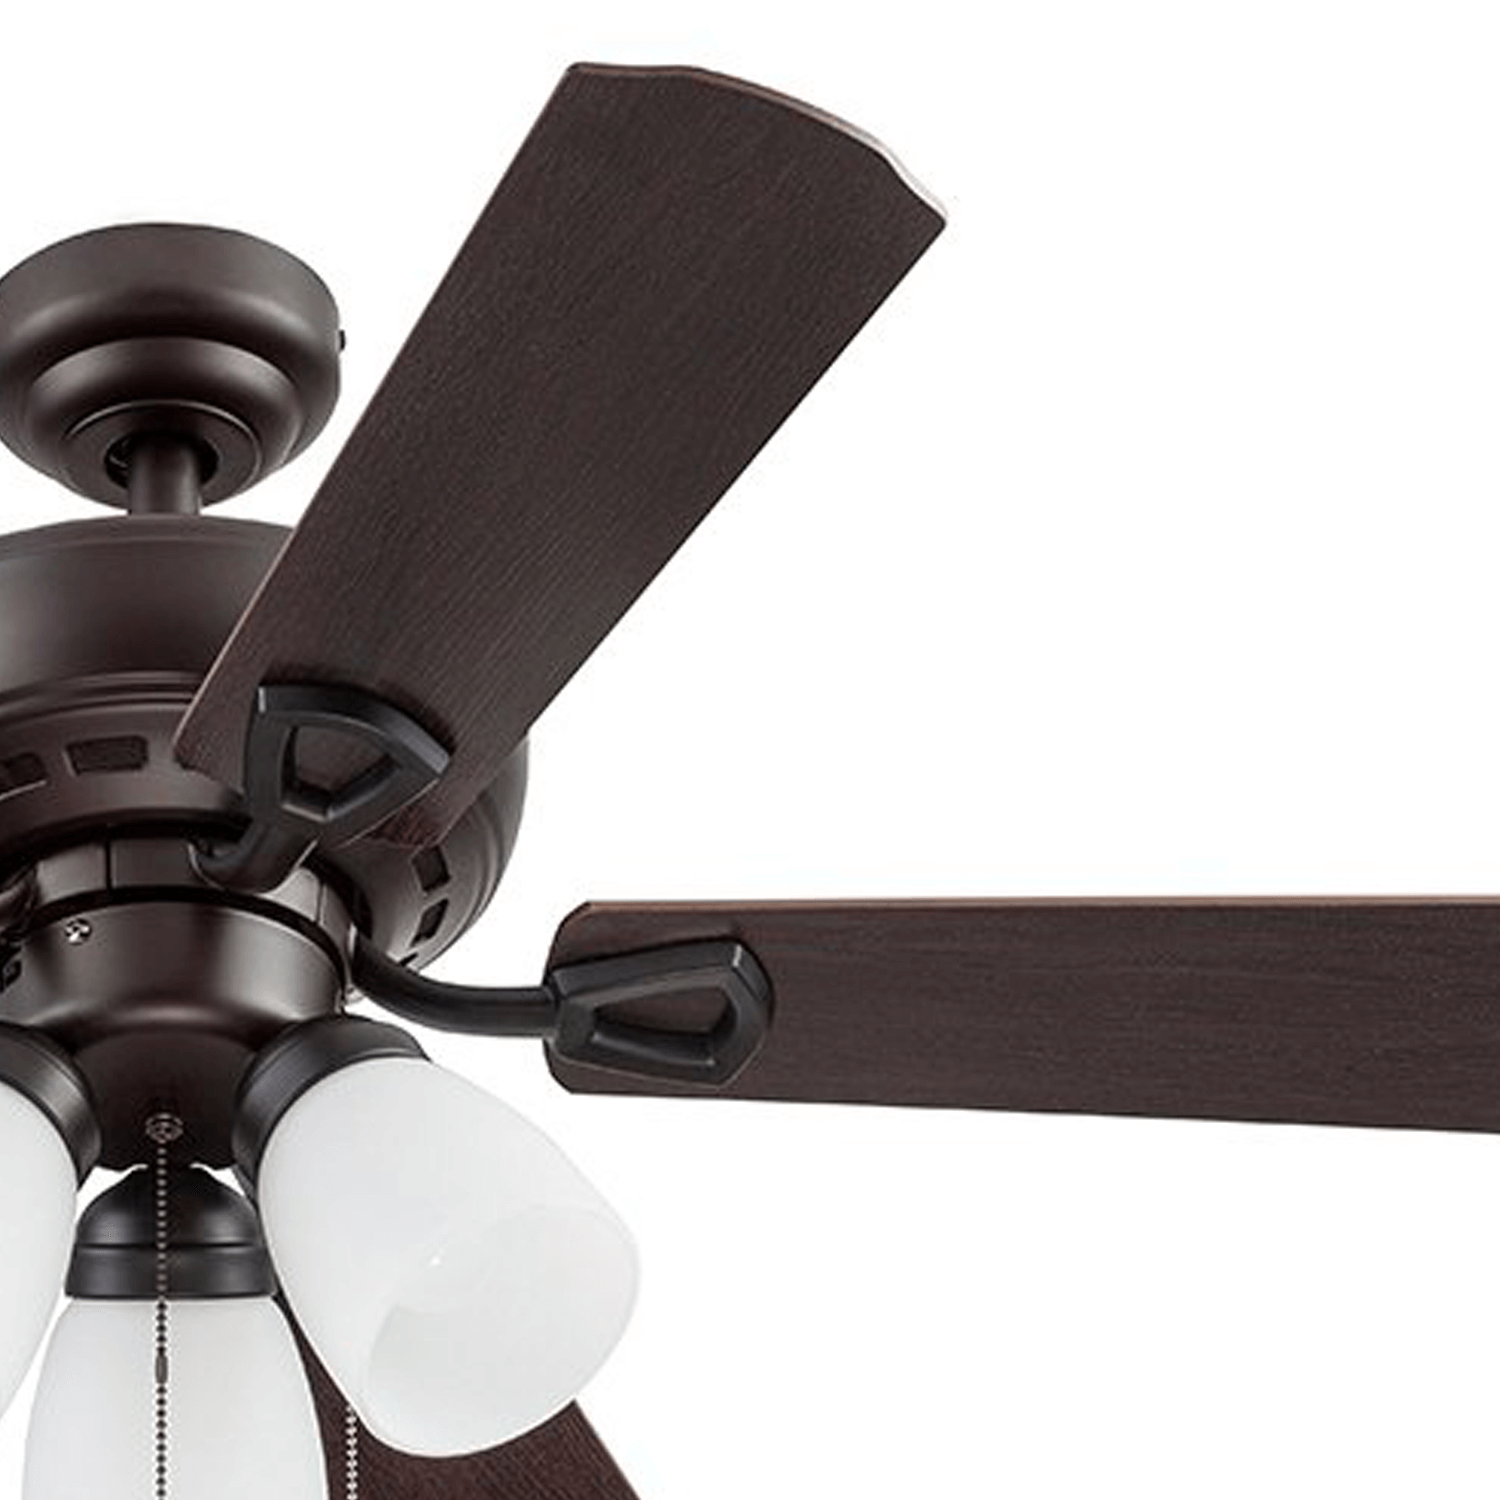 44 Inch Miller Park, Espresso Bronze, Pull Chain, Ceiling Fan by Prominence Home